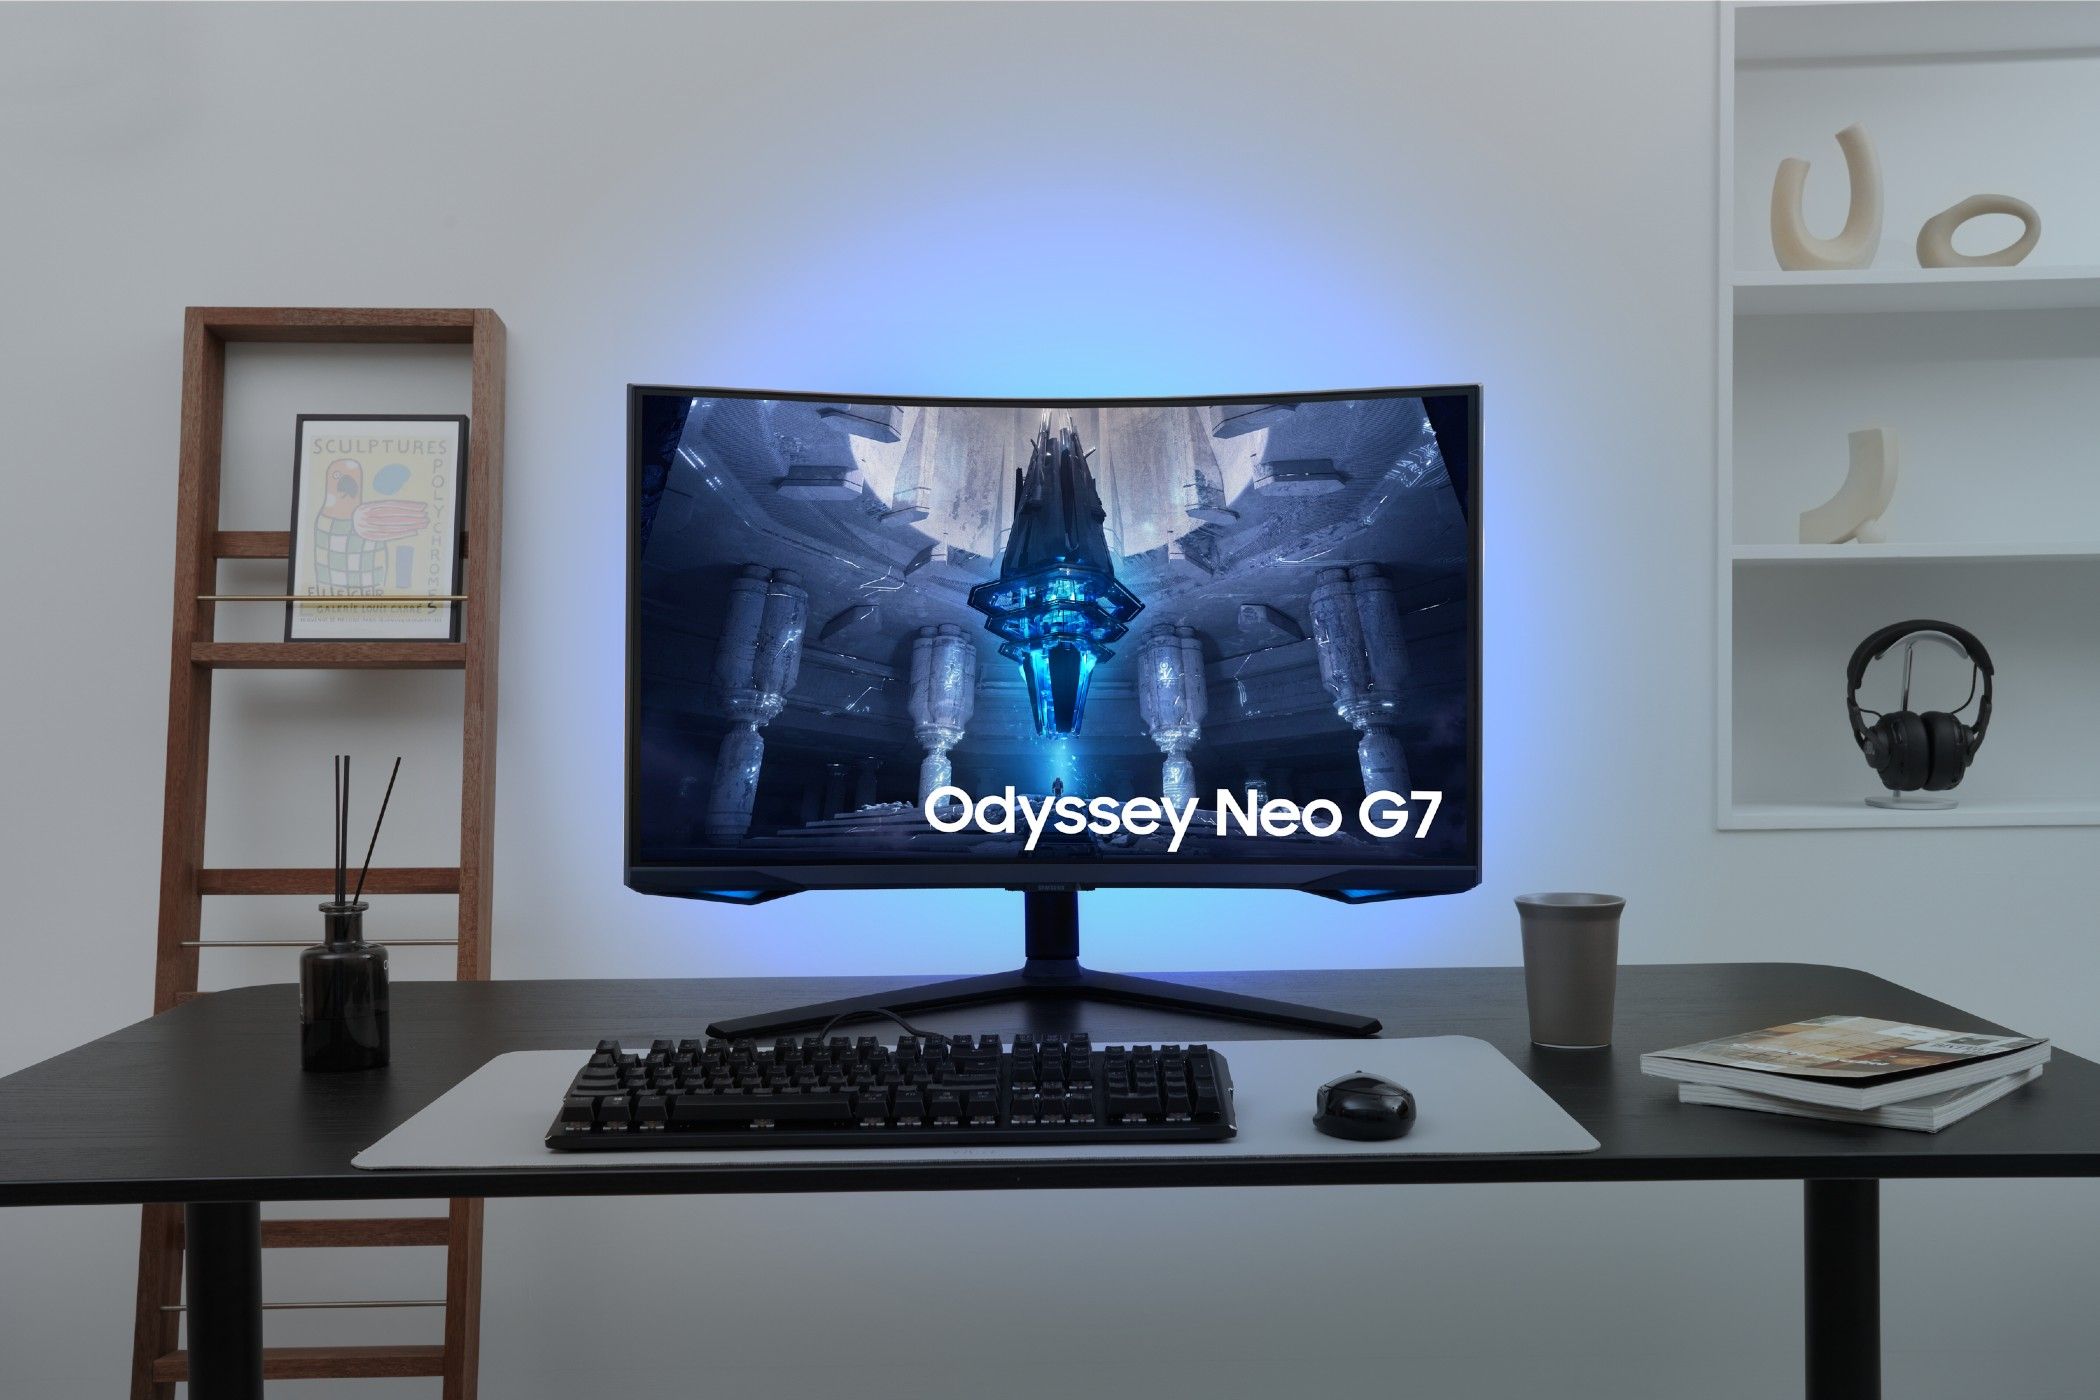 The Odyssey Neo G7 on a desk with a gaming keyboard and mouse.